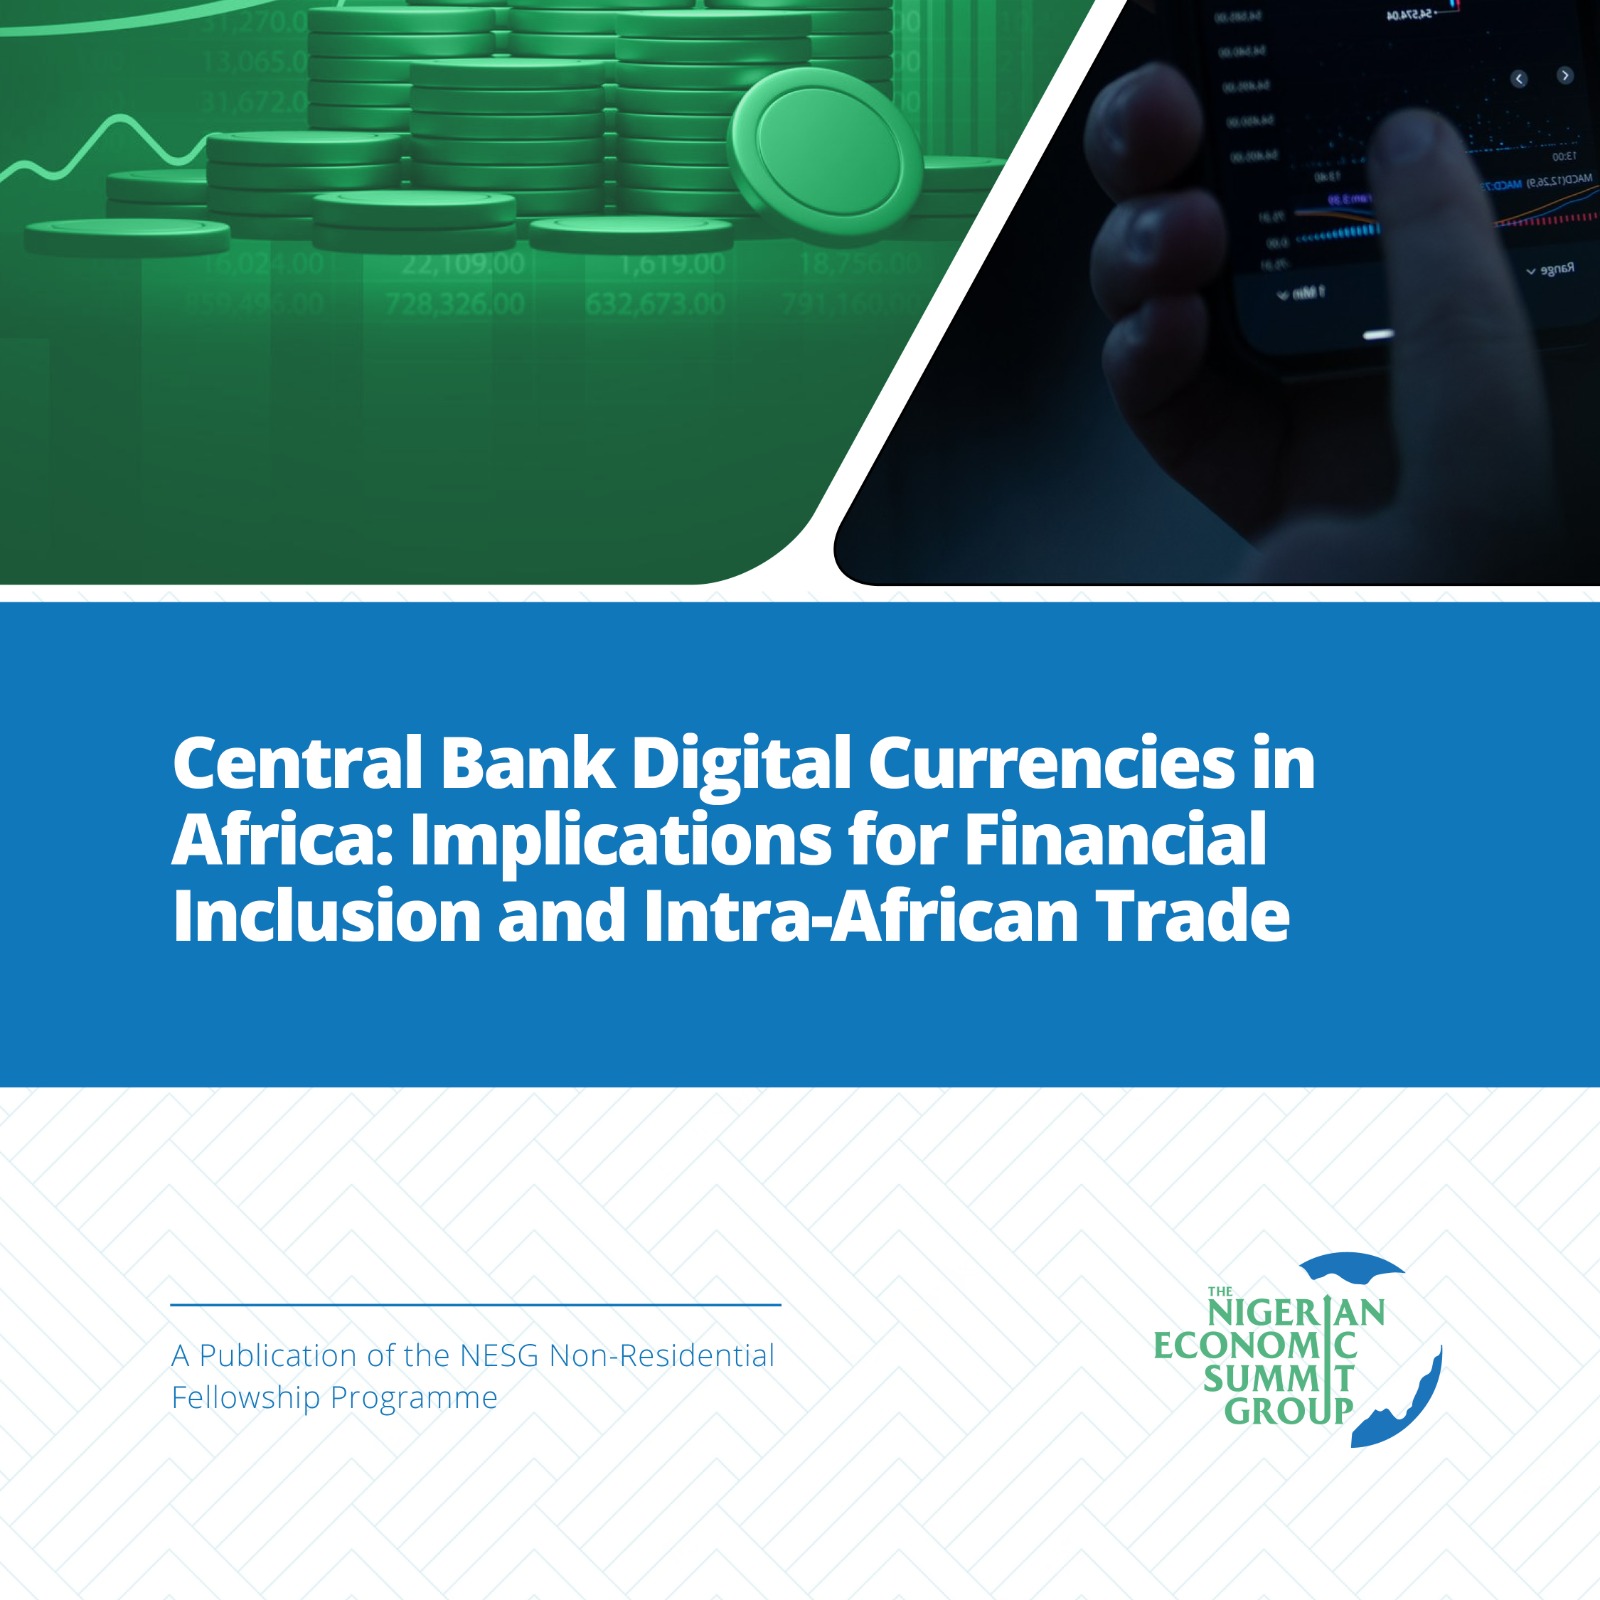 Central Bank Digital Currencies in Africa: Implications For Financial Inclusion And Intra-African Trade